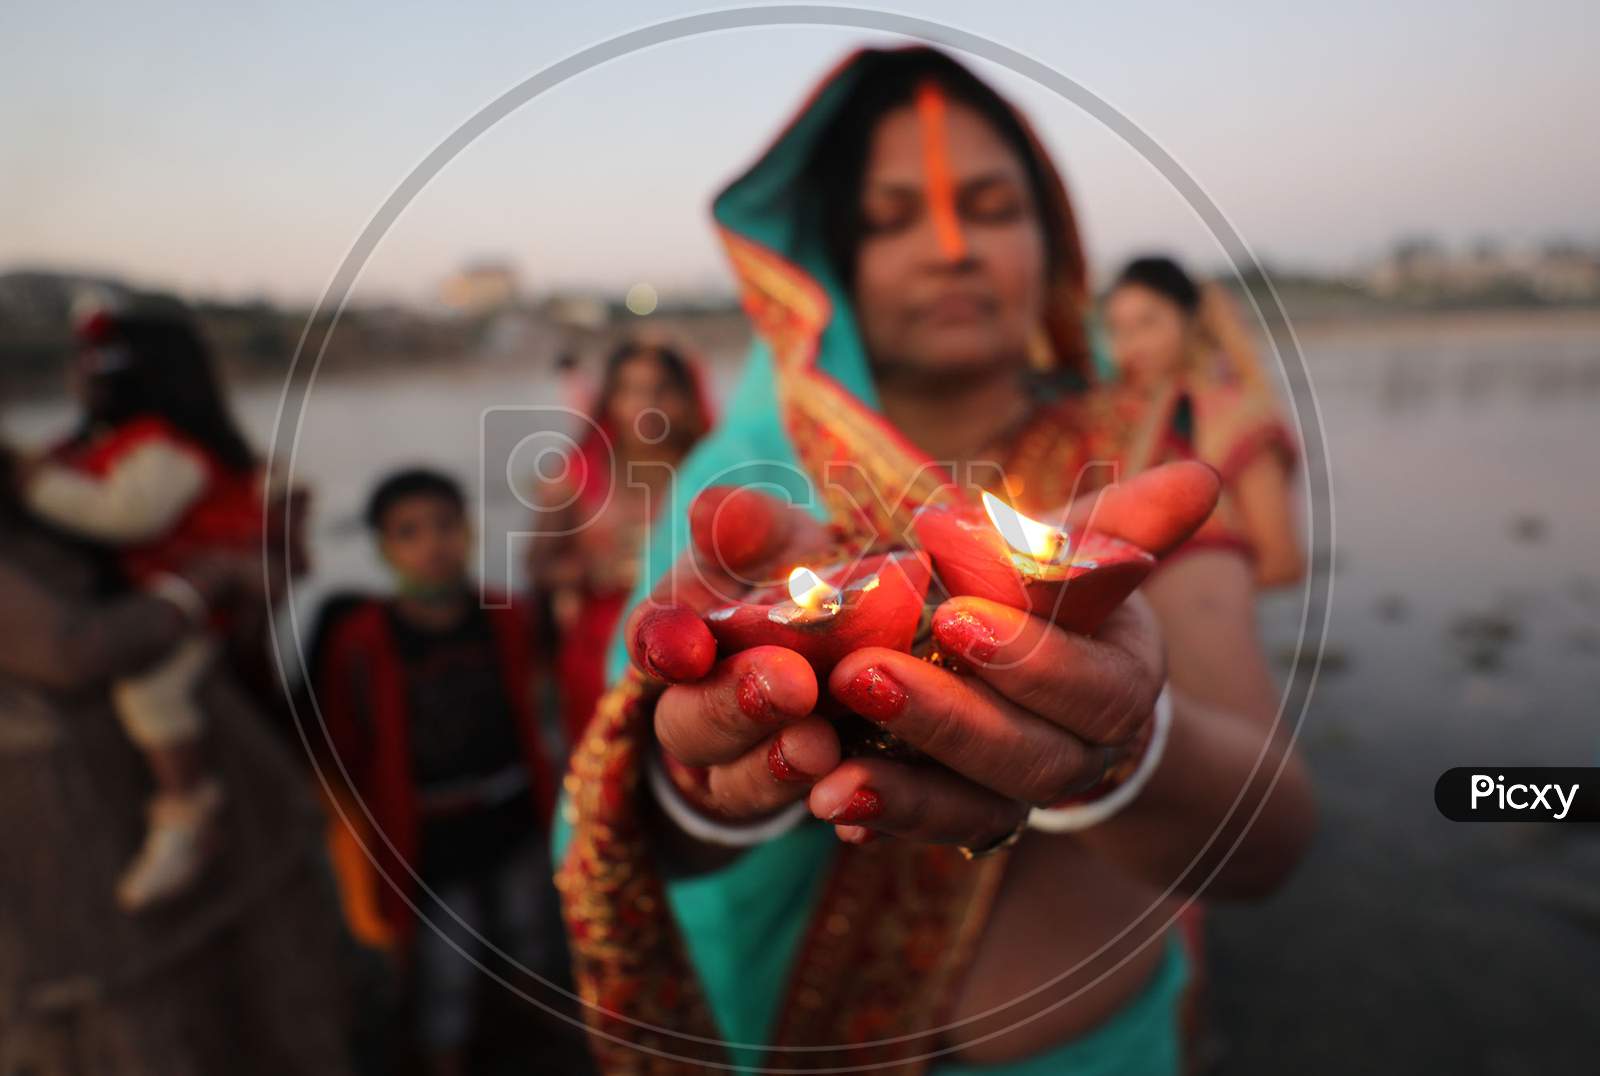 Devotees perform rituals on the banks of  river Tawi on the occasion of 'Chhath Puja' in Jammu,20 NOVEMBER,2020.